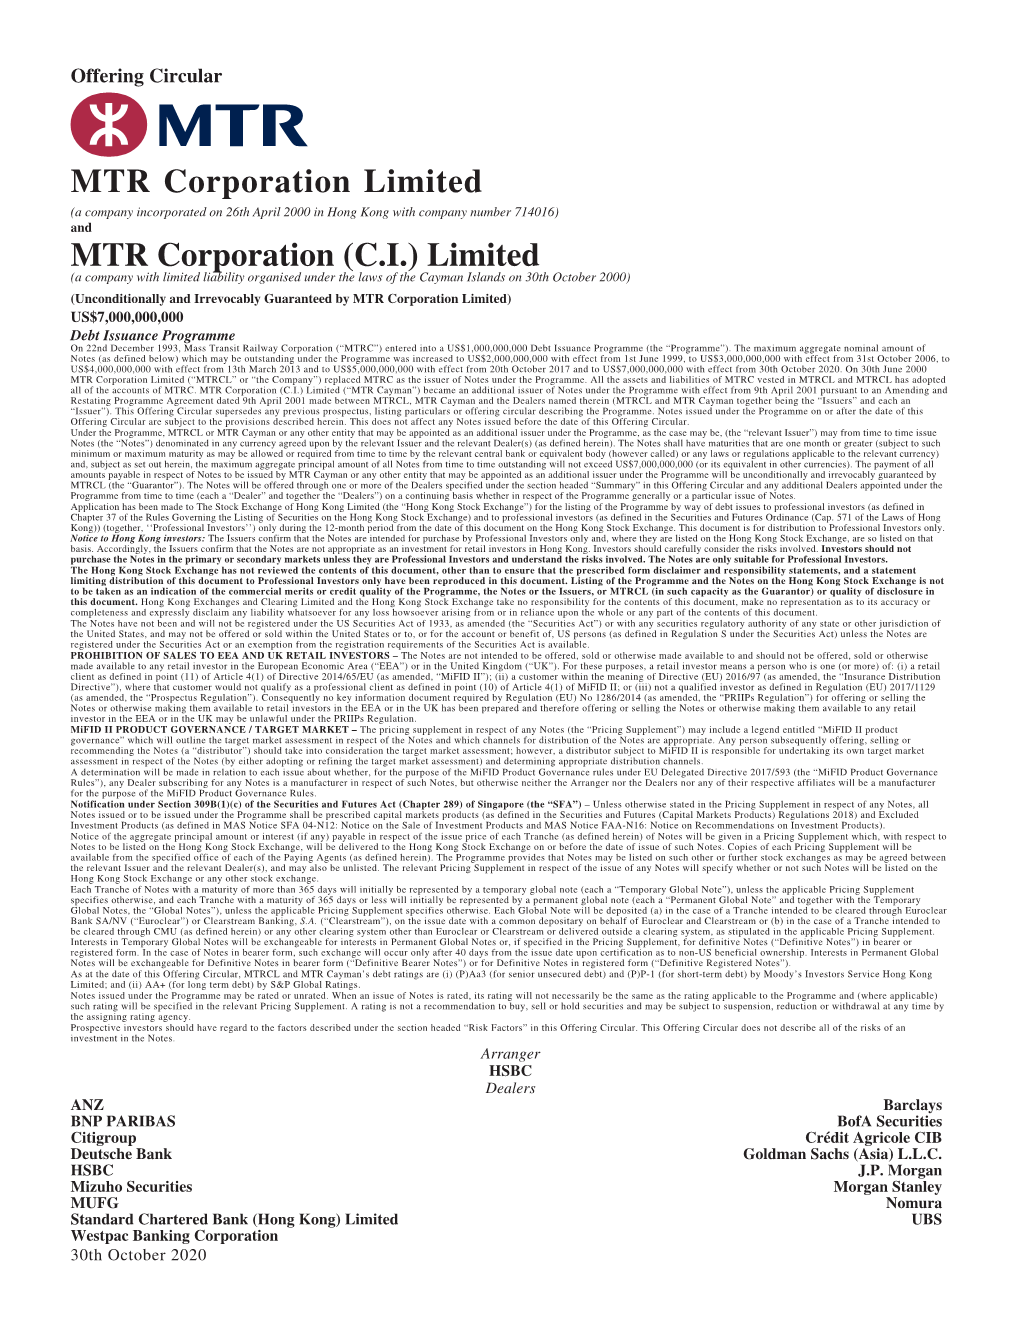 MTR Corporation (C.I.) Limited